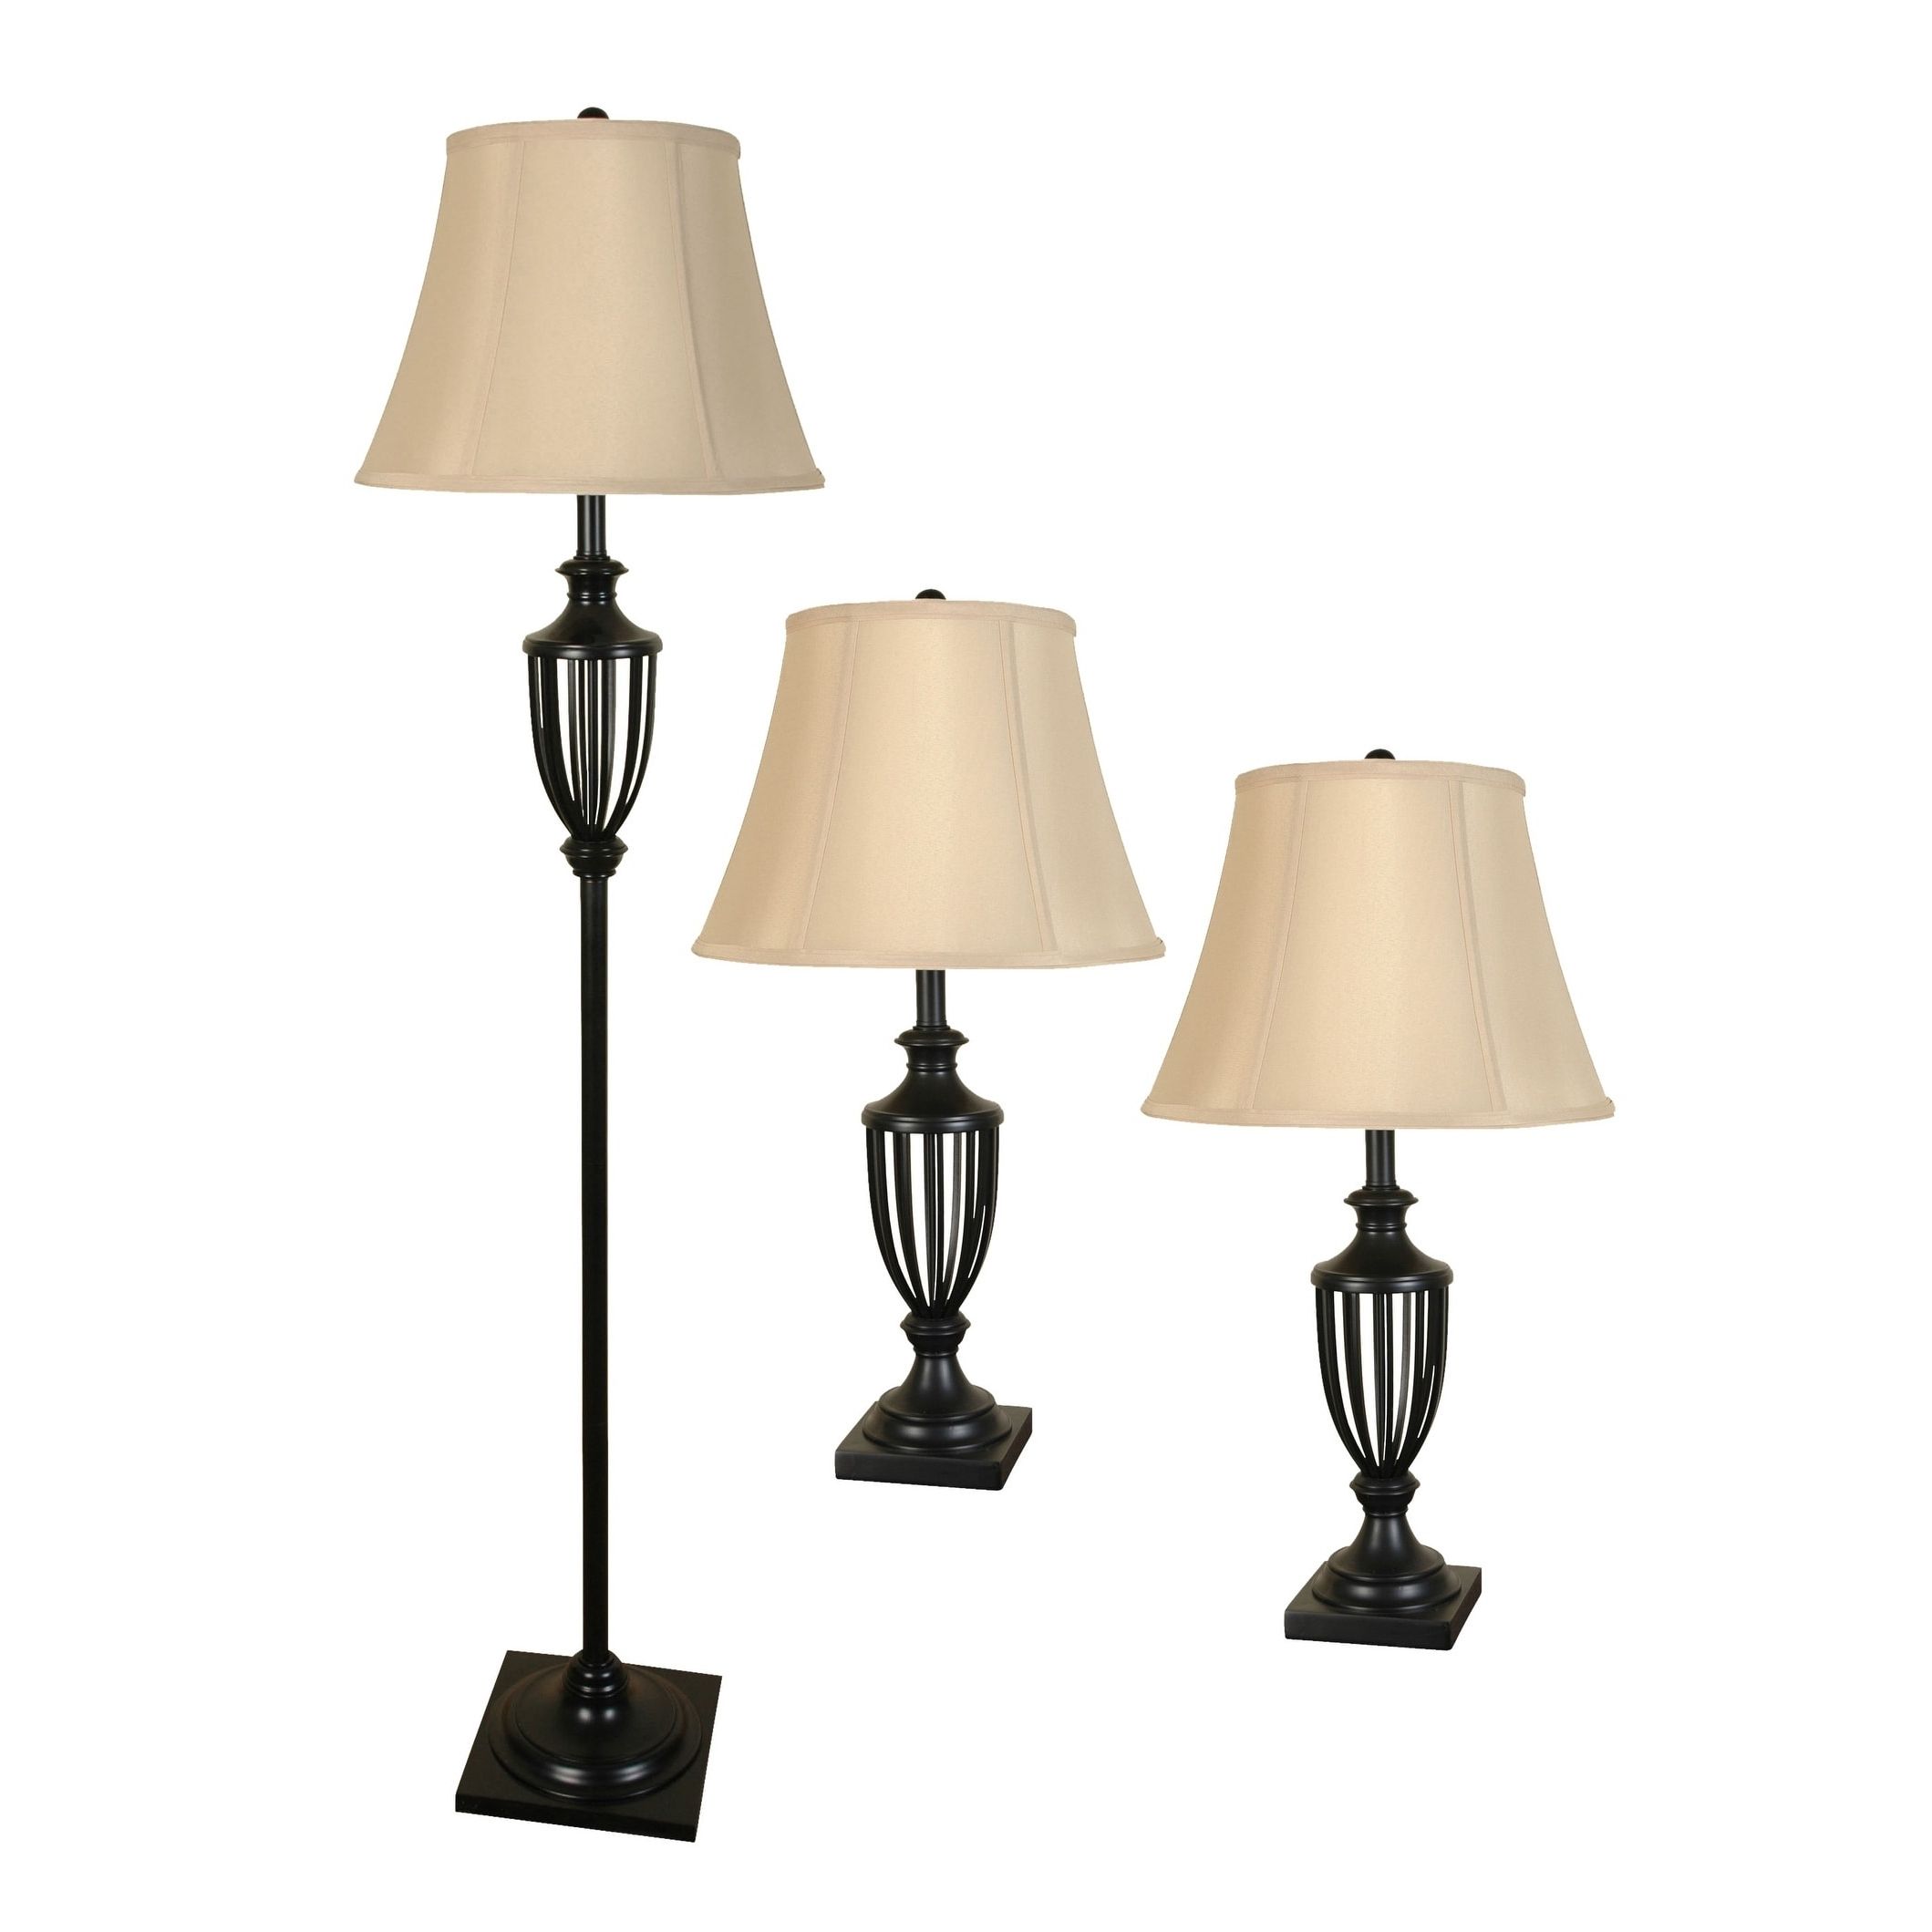 Most Current 3 Piece Setstanding Lamps Throughout Lamps Per Se Black Lamp Set (3 Piece) – On Sale – Overstock –  (View 14 of 15)